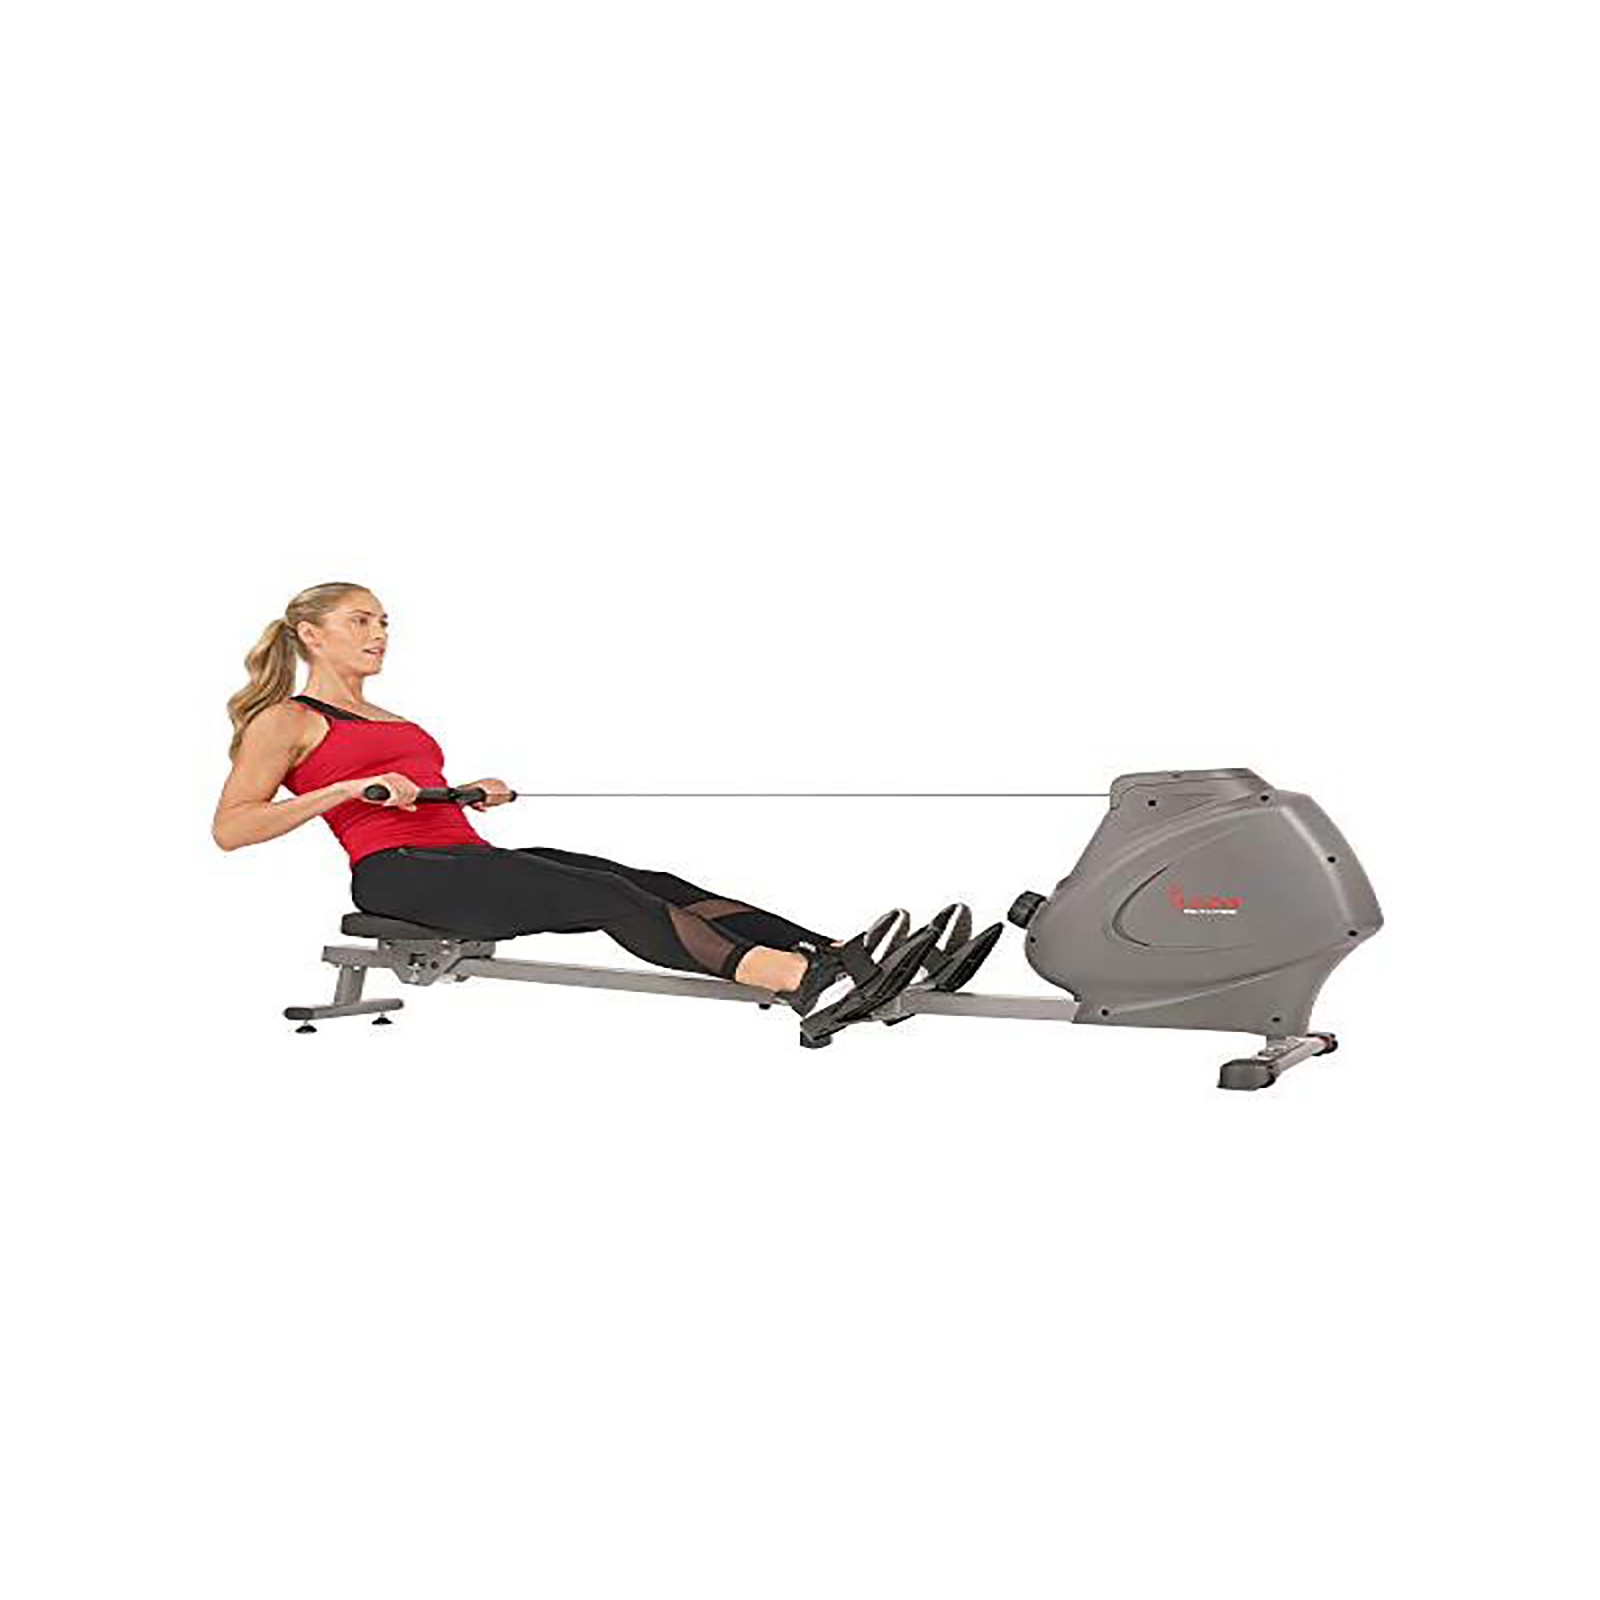 The 7 Best Magnetic Rowing Machines for Your Home: Reviews and Buying  Guide! - Mancaves HQ